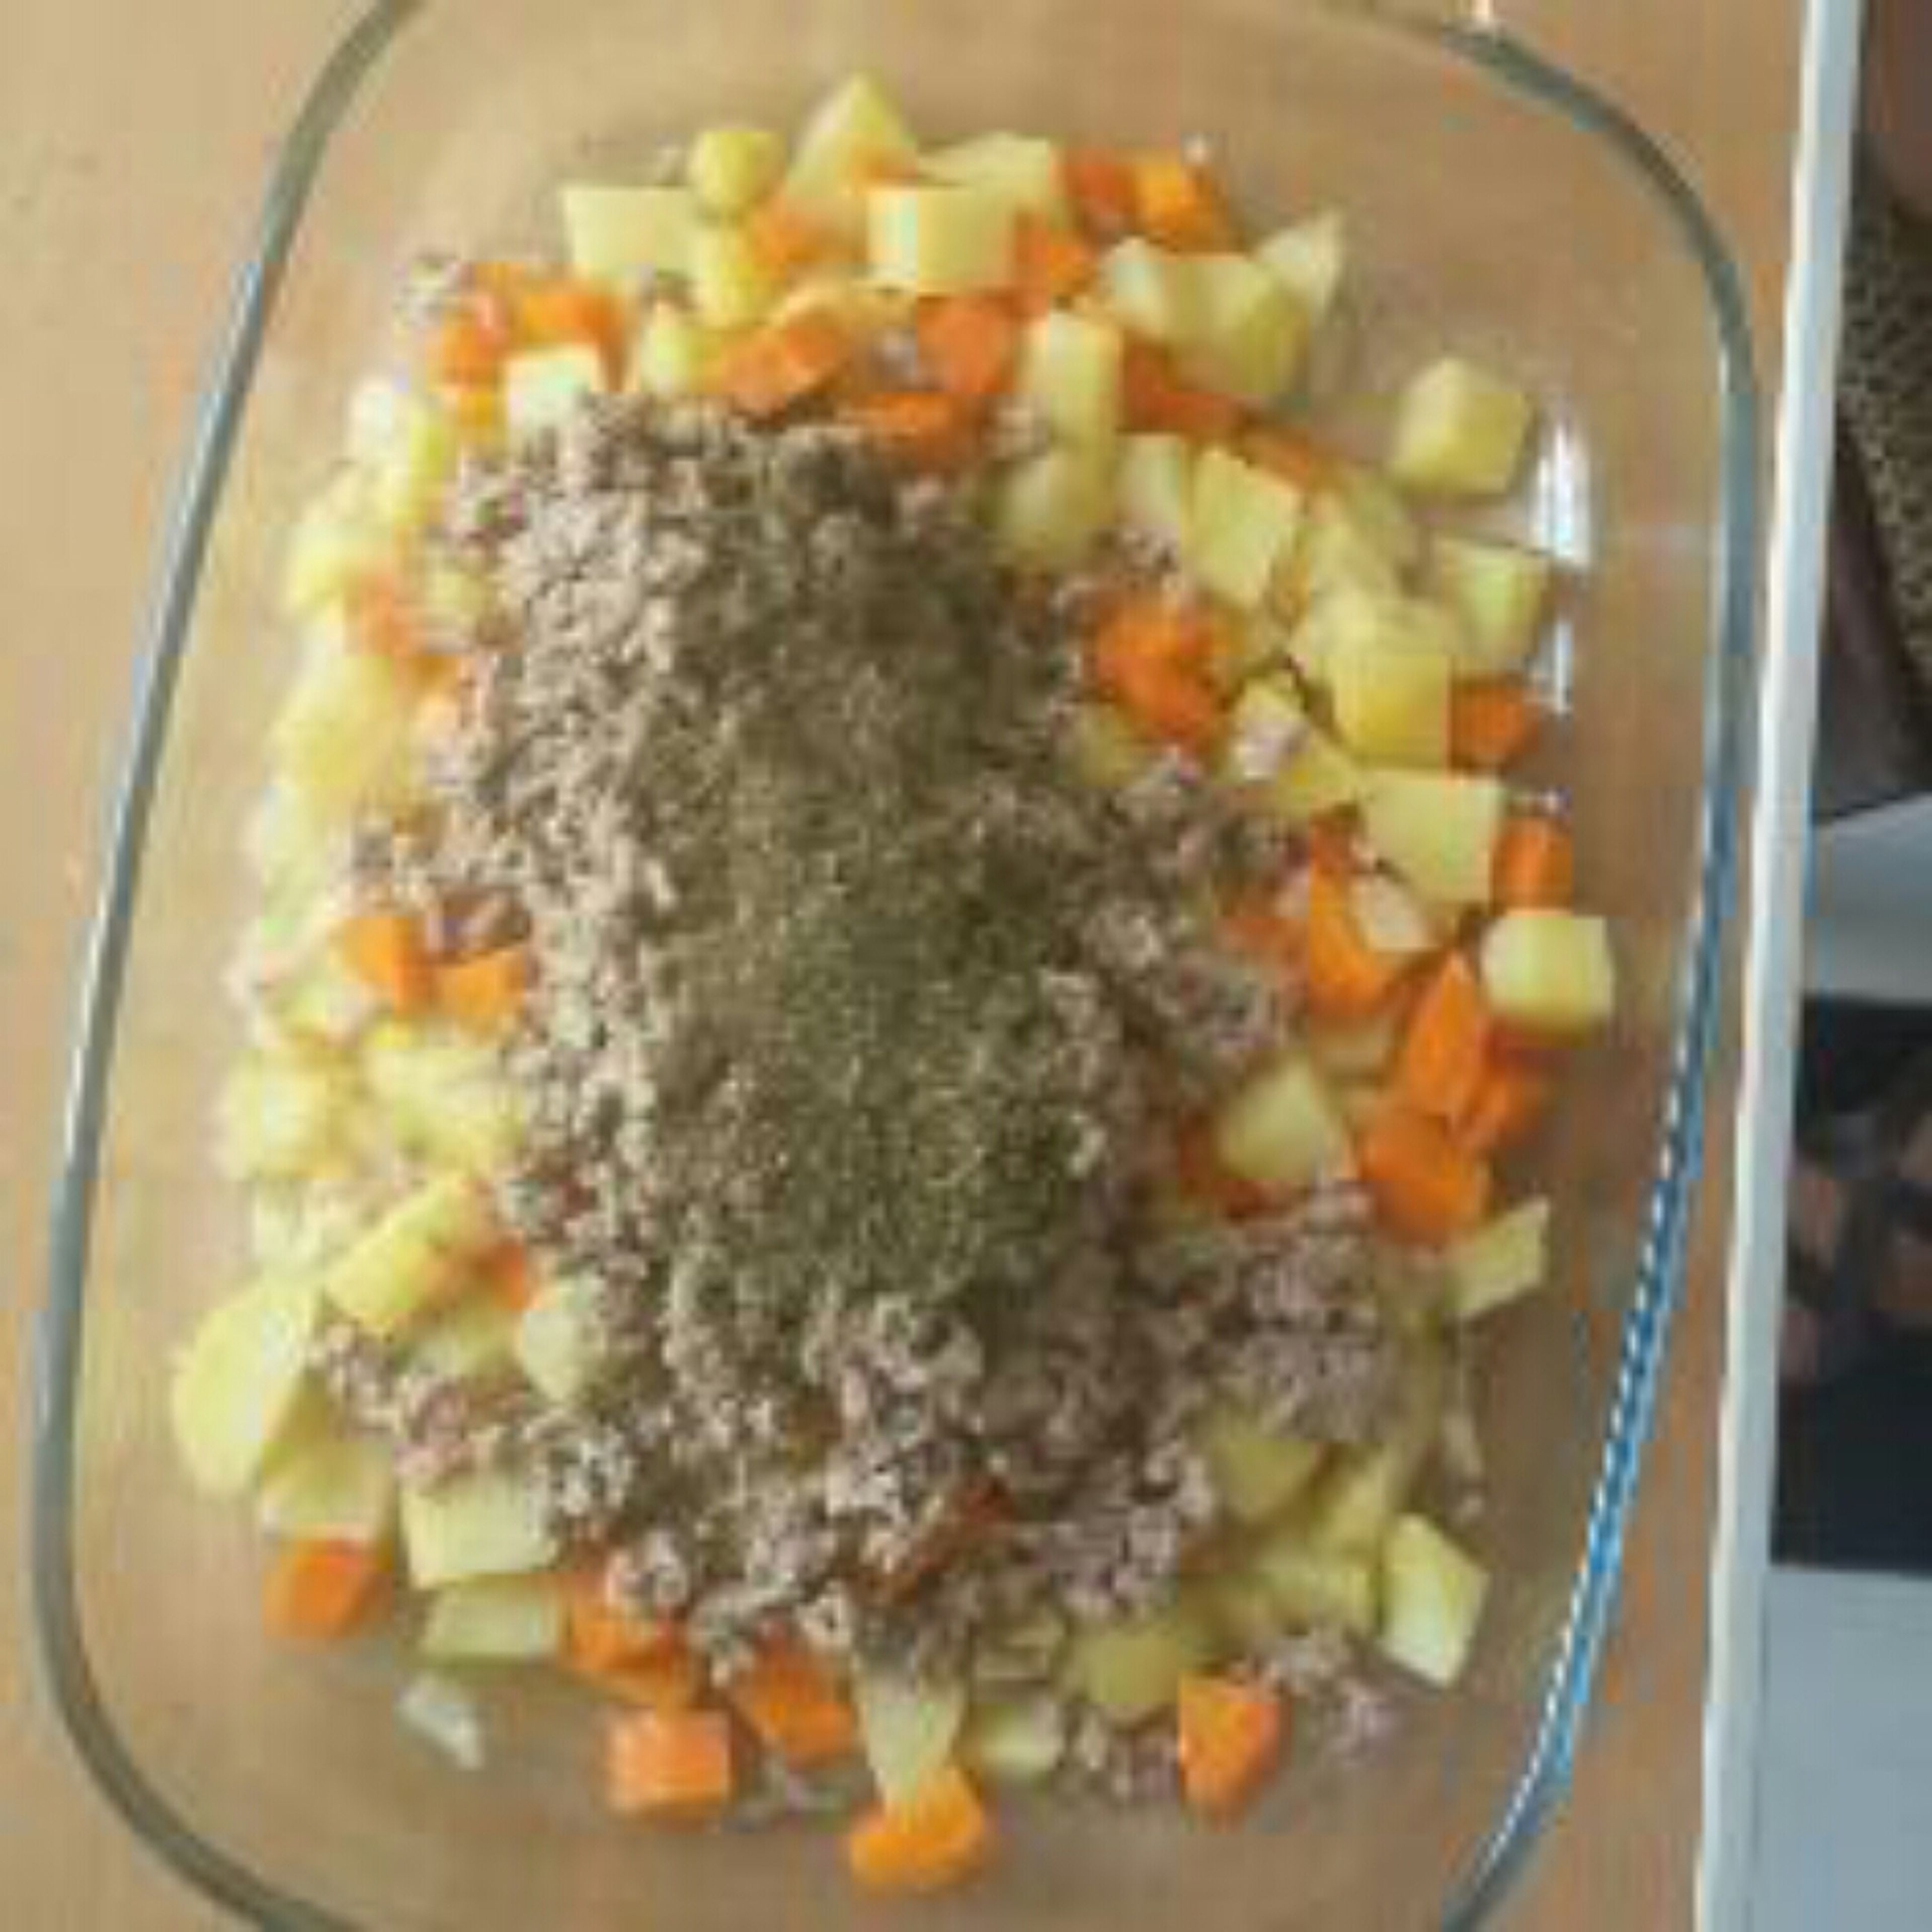 mix meat, vegetables and savoury (chubritsa) in the dish